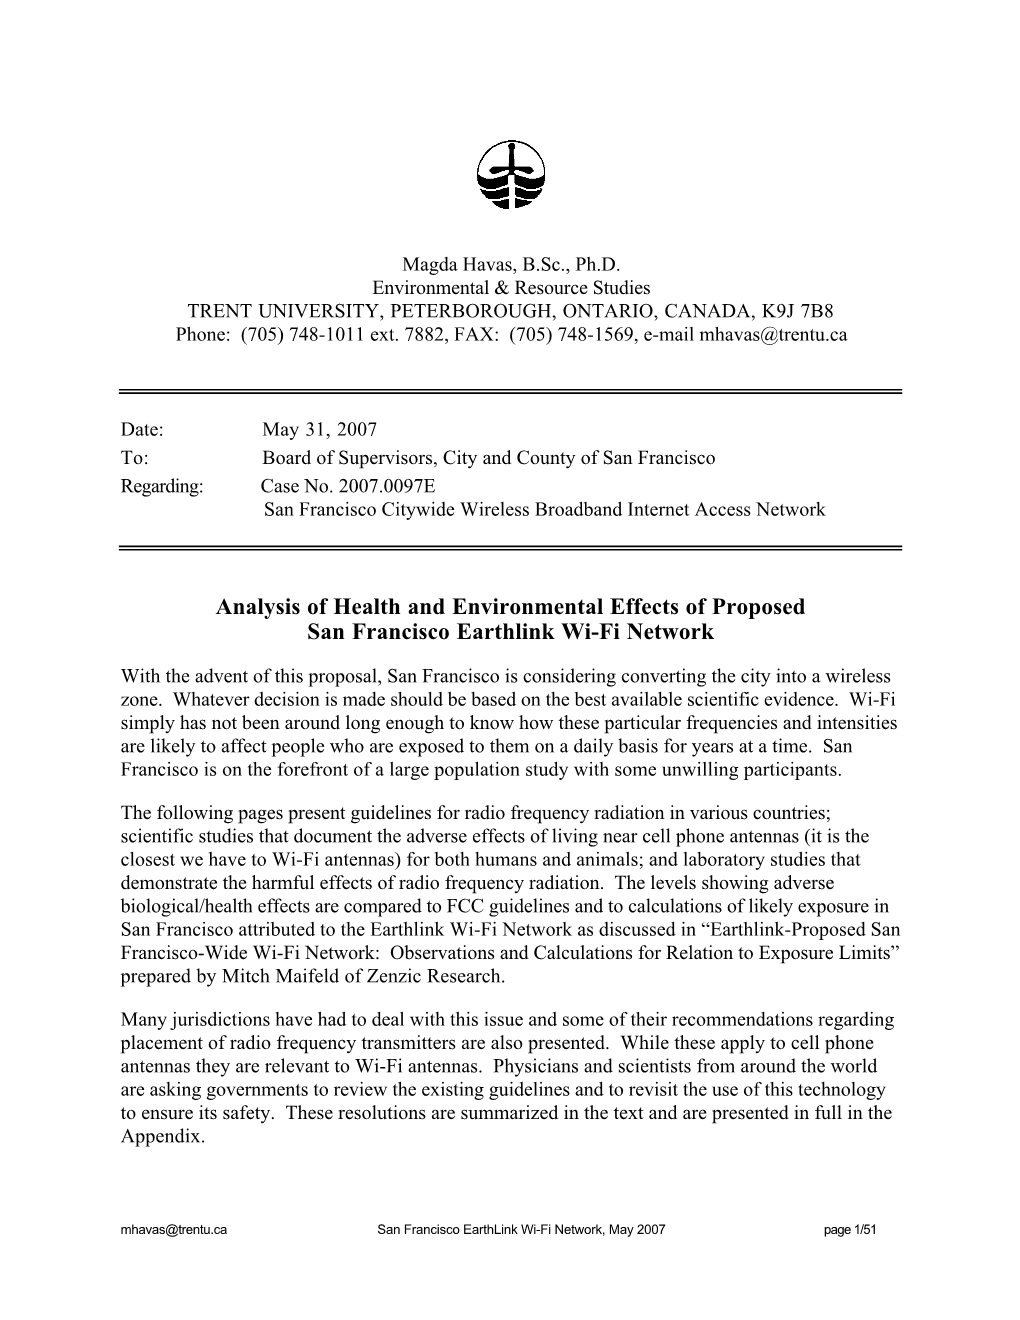 Analysis of Health and Environmental Effects of Proposed San Francisco Earthlink Wi-Fi Network